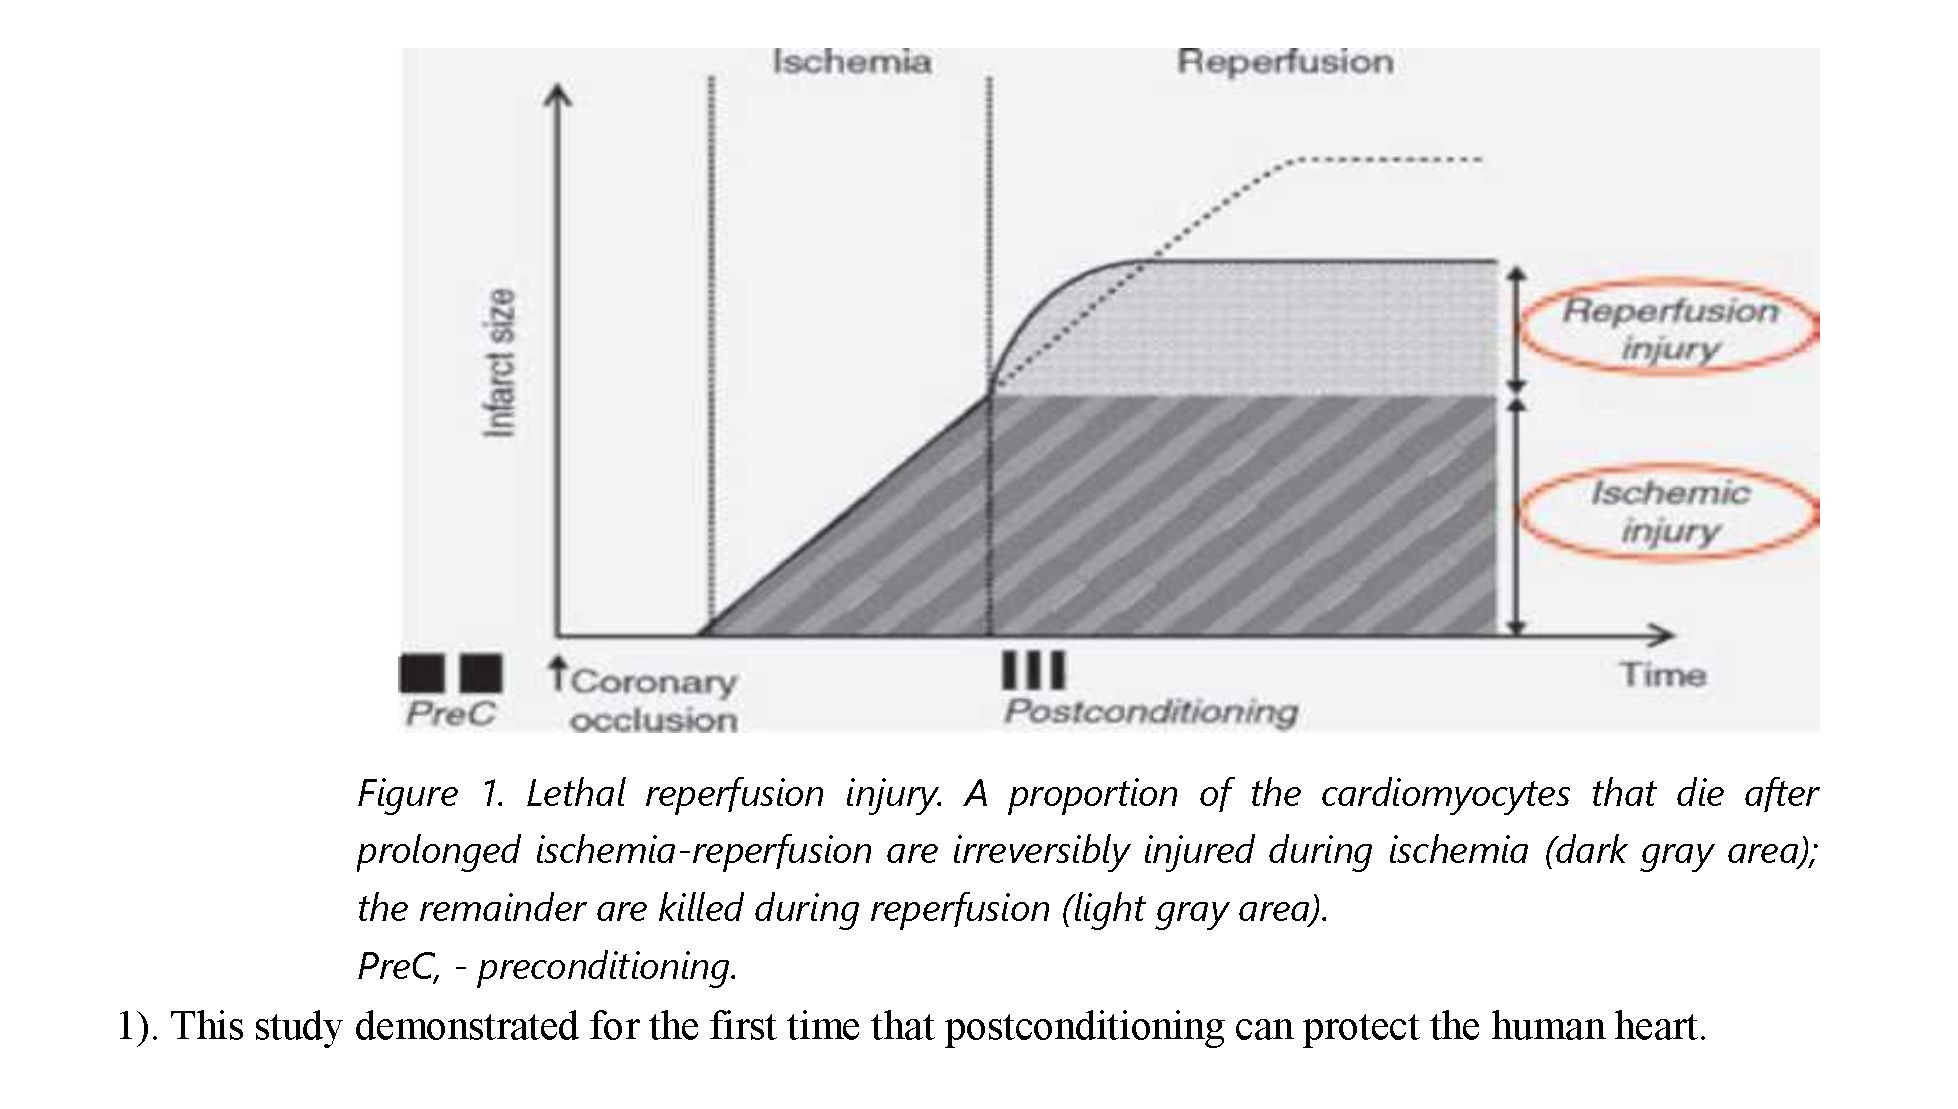 Protective features of postconditioning for the human heart